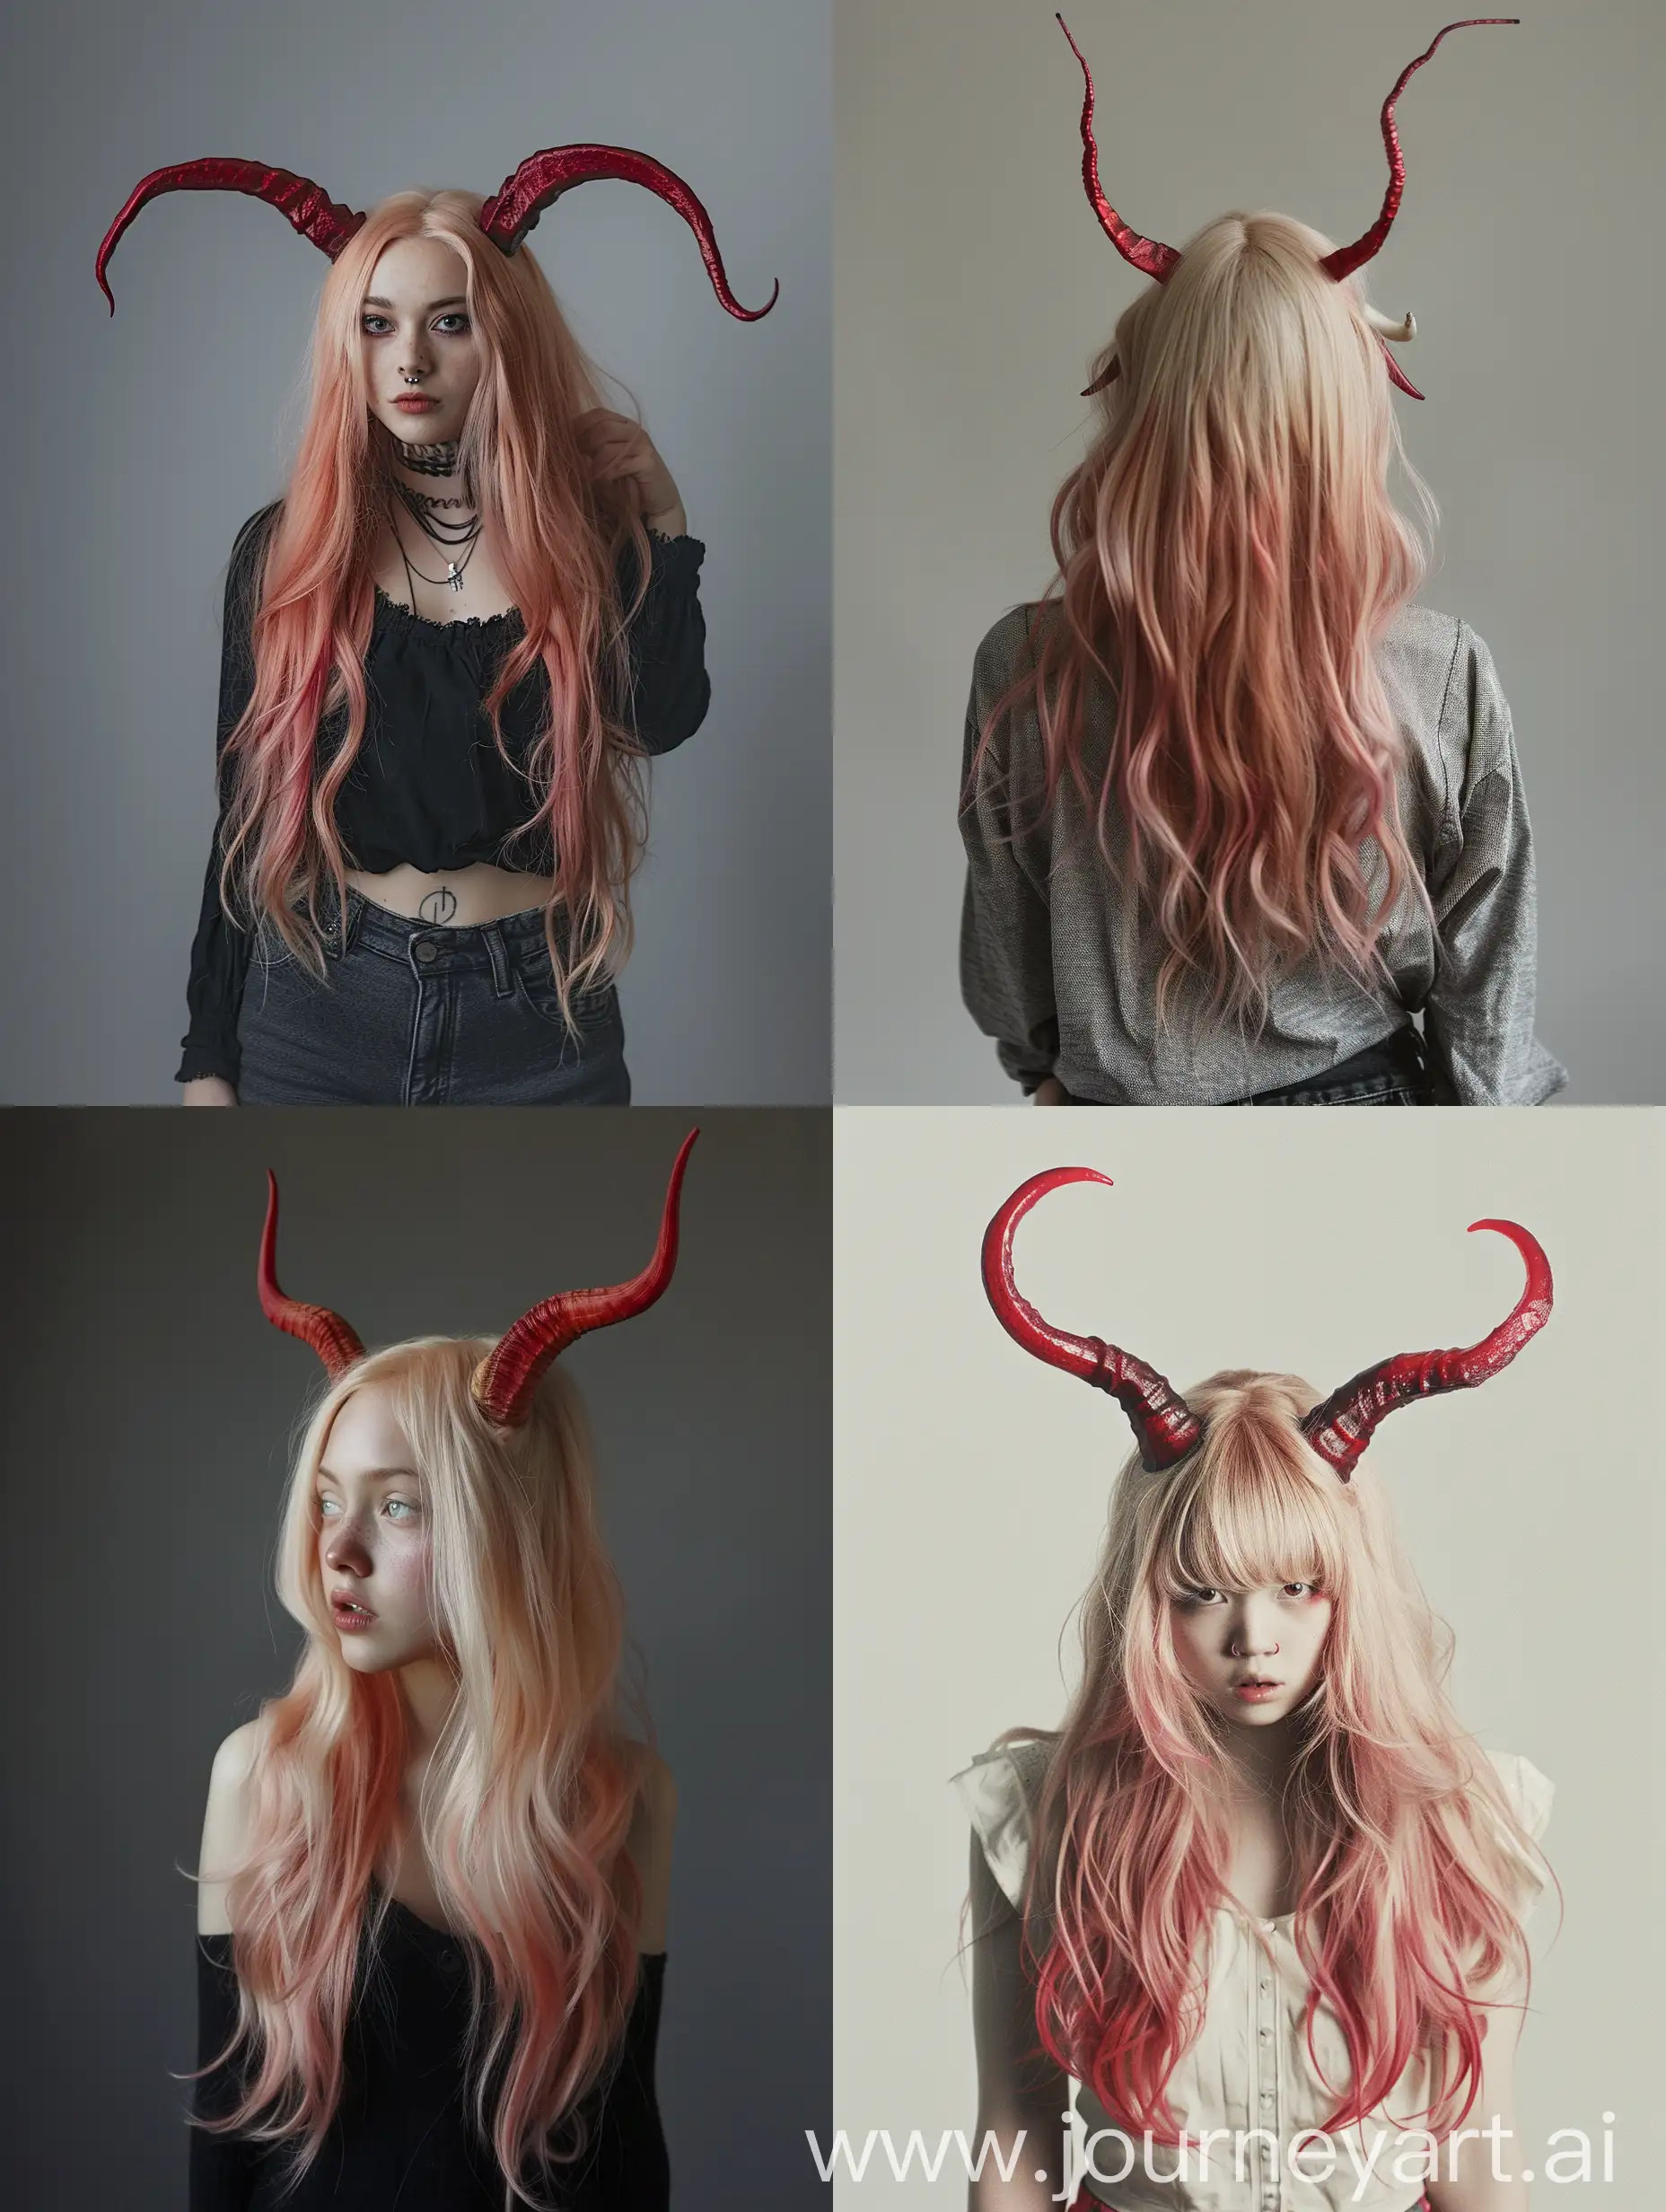 Blonde-Woman-with-Long-Pinkish-Hair-and-Red-Horns-Ethereal-Portrait-in-Warm-Lighting